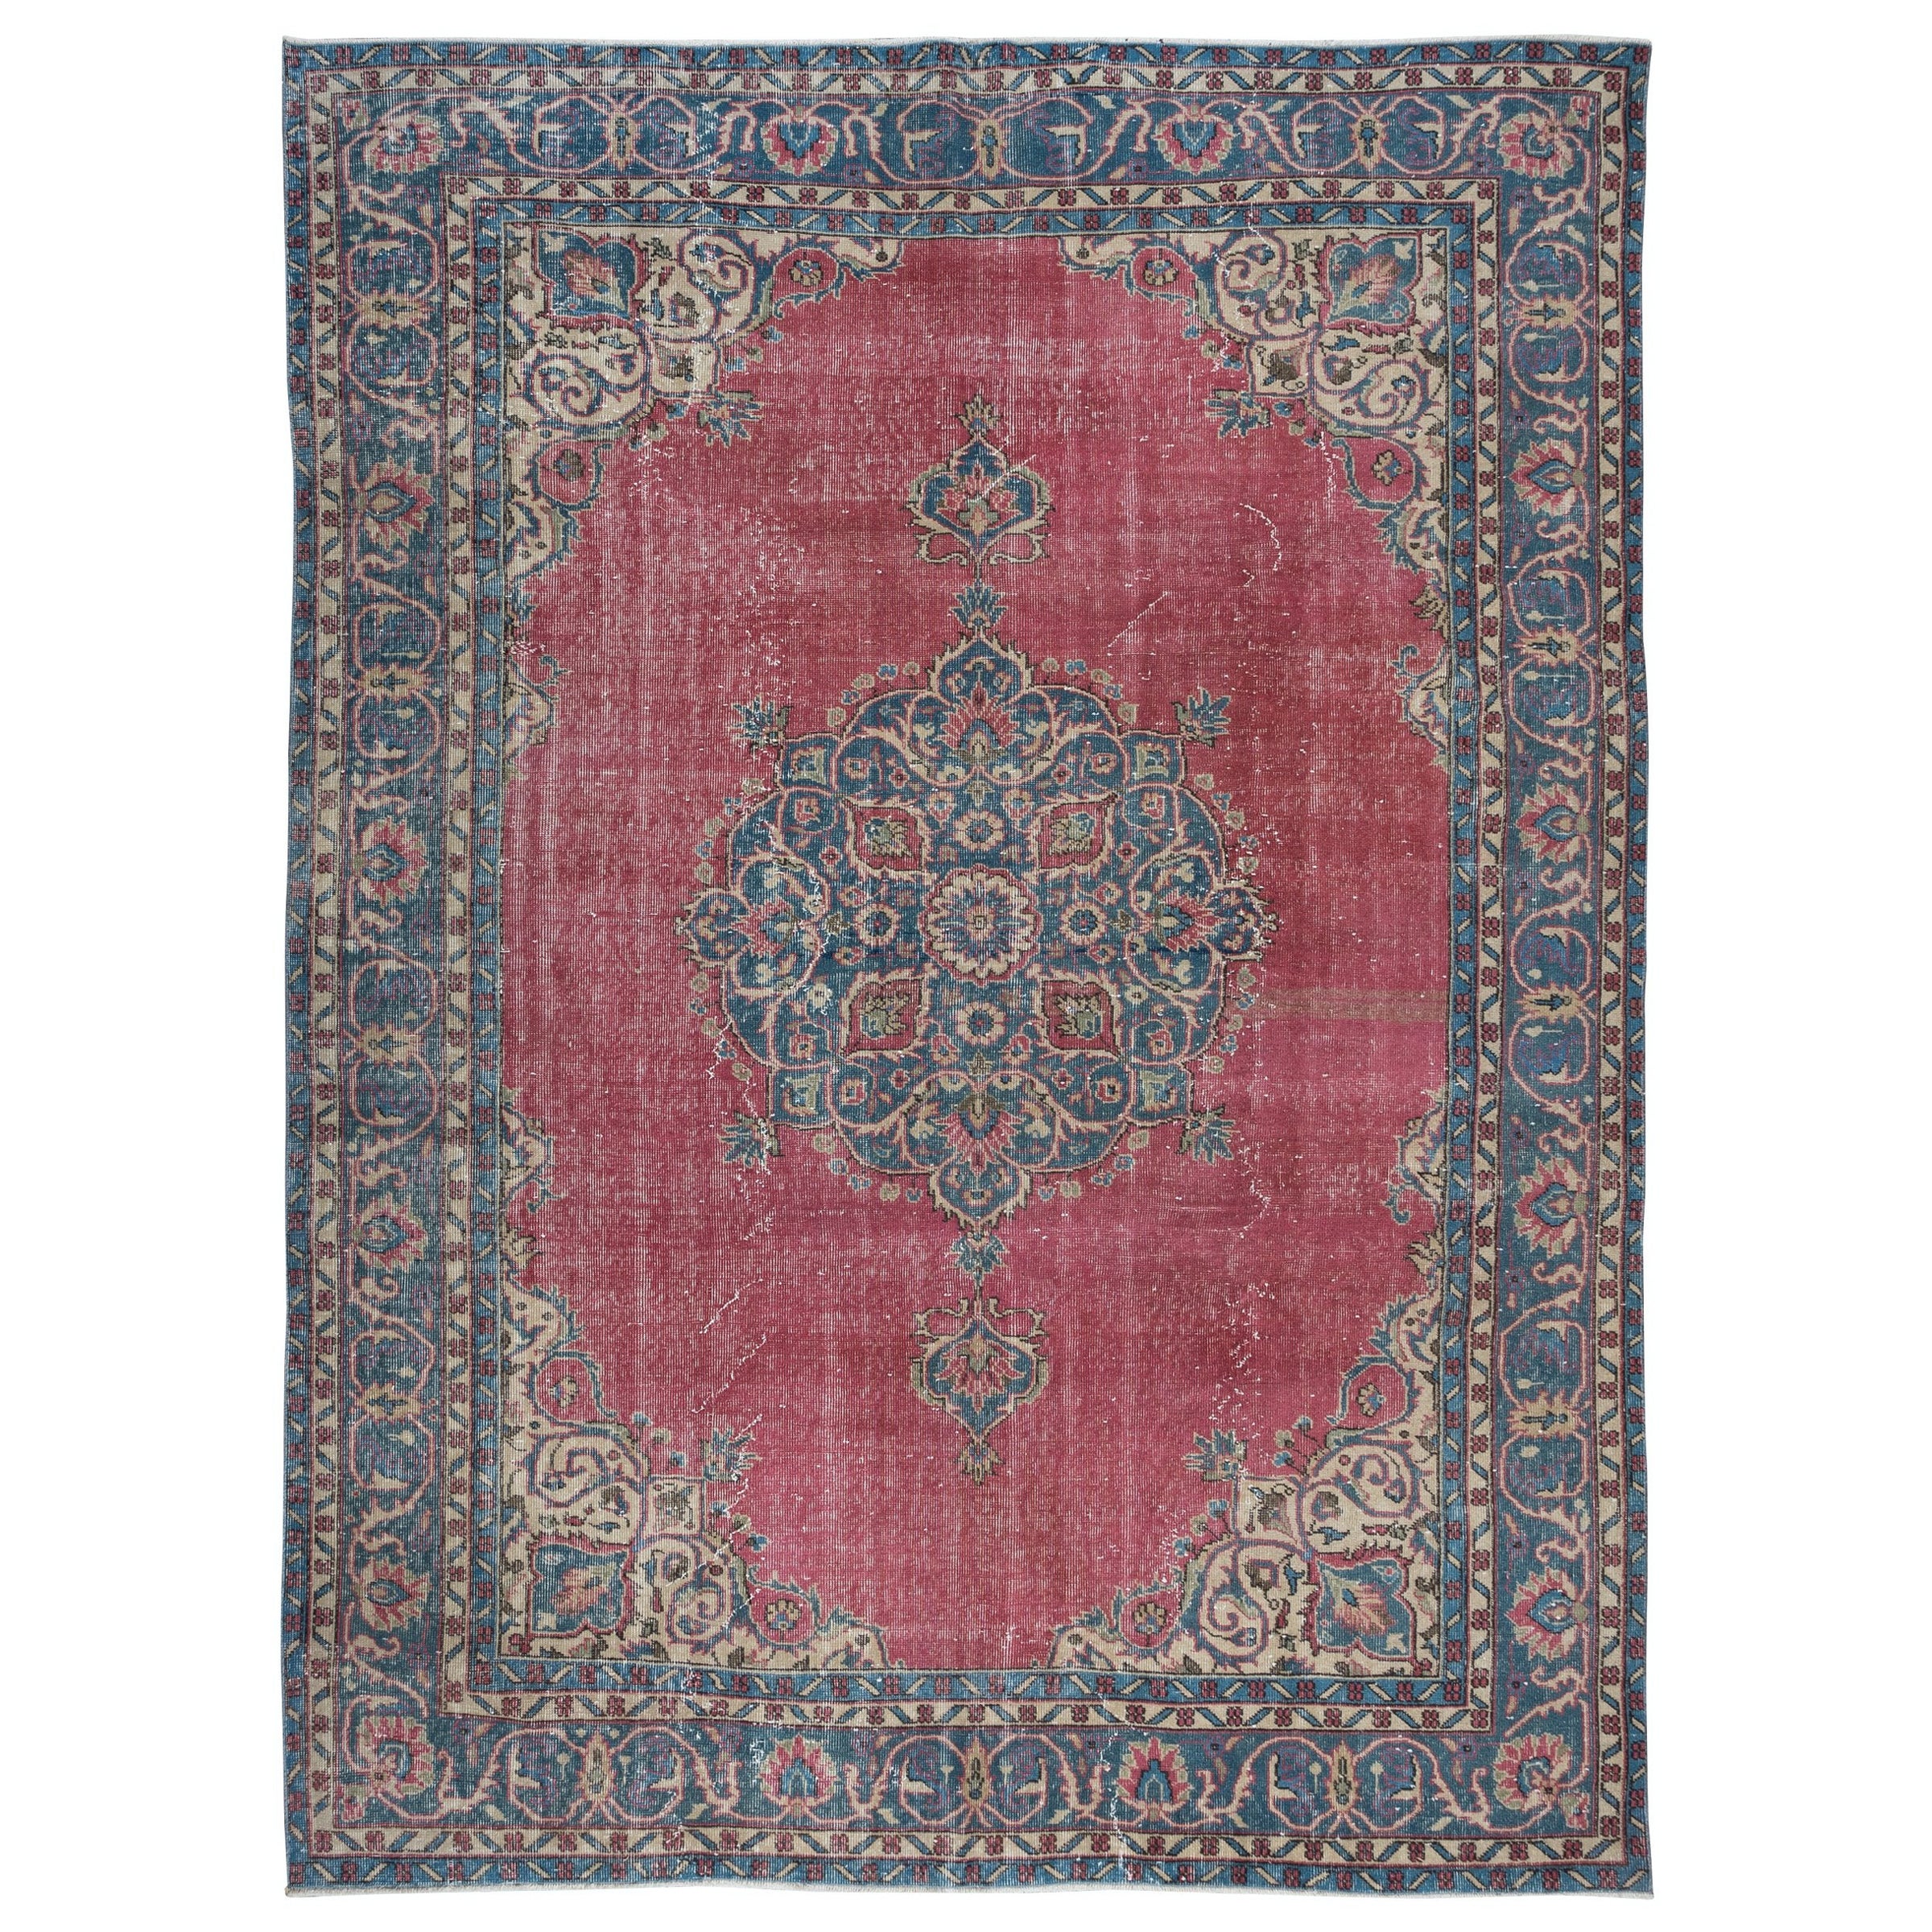 7.8x10.5 Ft One of a kind Handmade Vintage Anatolian Area Rug in Red & Dark Blue For Sale